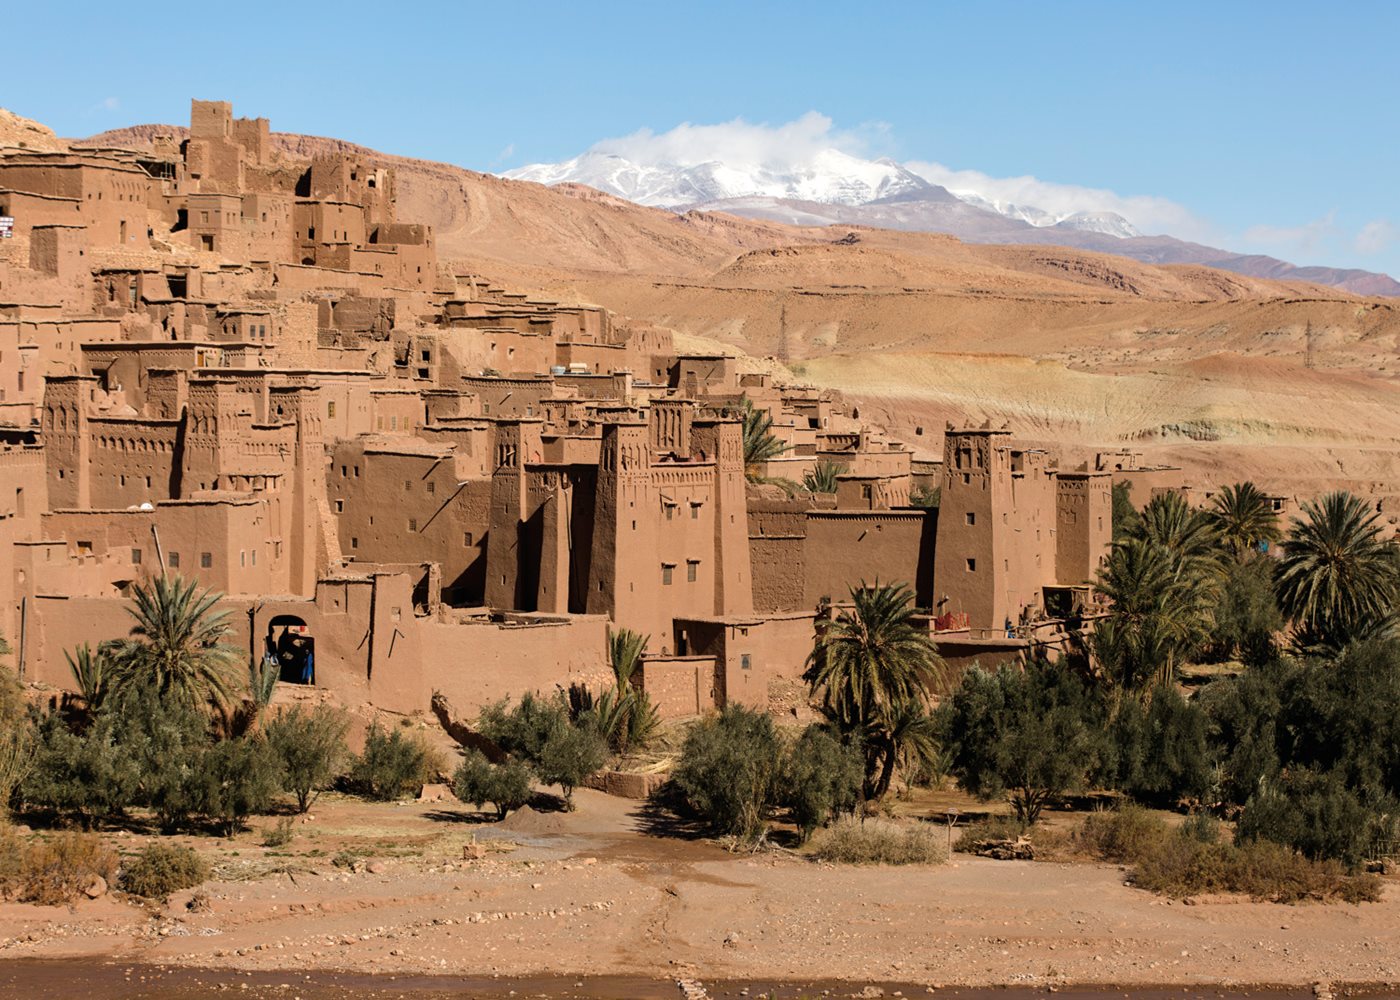 <p>About 30 kilometers west of Ouarzazate, the hillside mudbrick village of Aït Benhaddou is both a <span class="smallcaps">unesco</span> World Heritage Site and a popular set for many films, including <i>The Jewel of the Nile</i>, <i>Gladiator</i> and more.</p>
